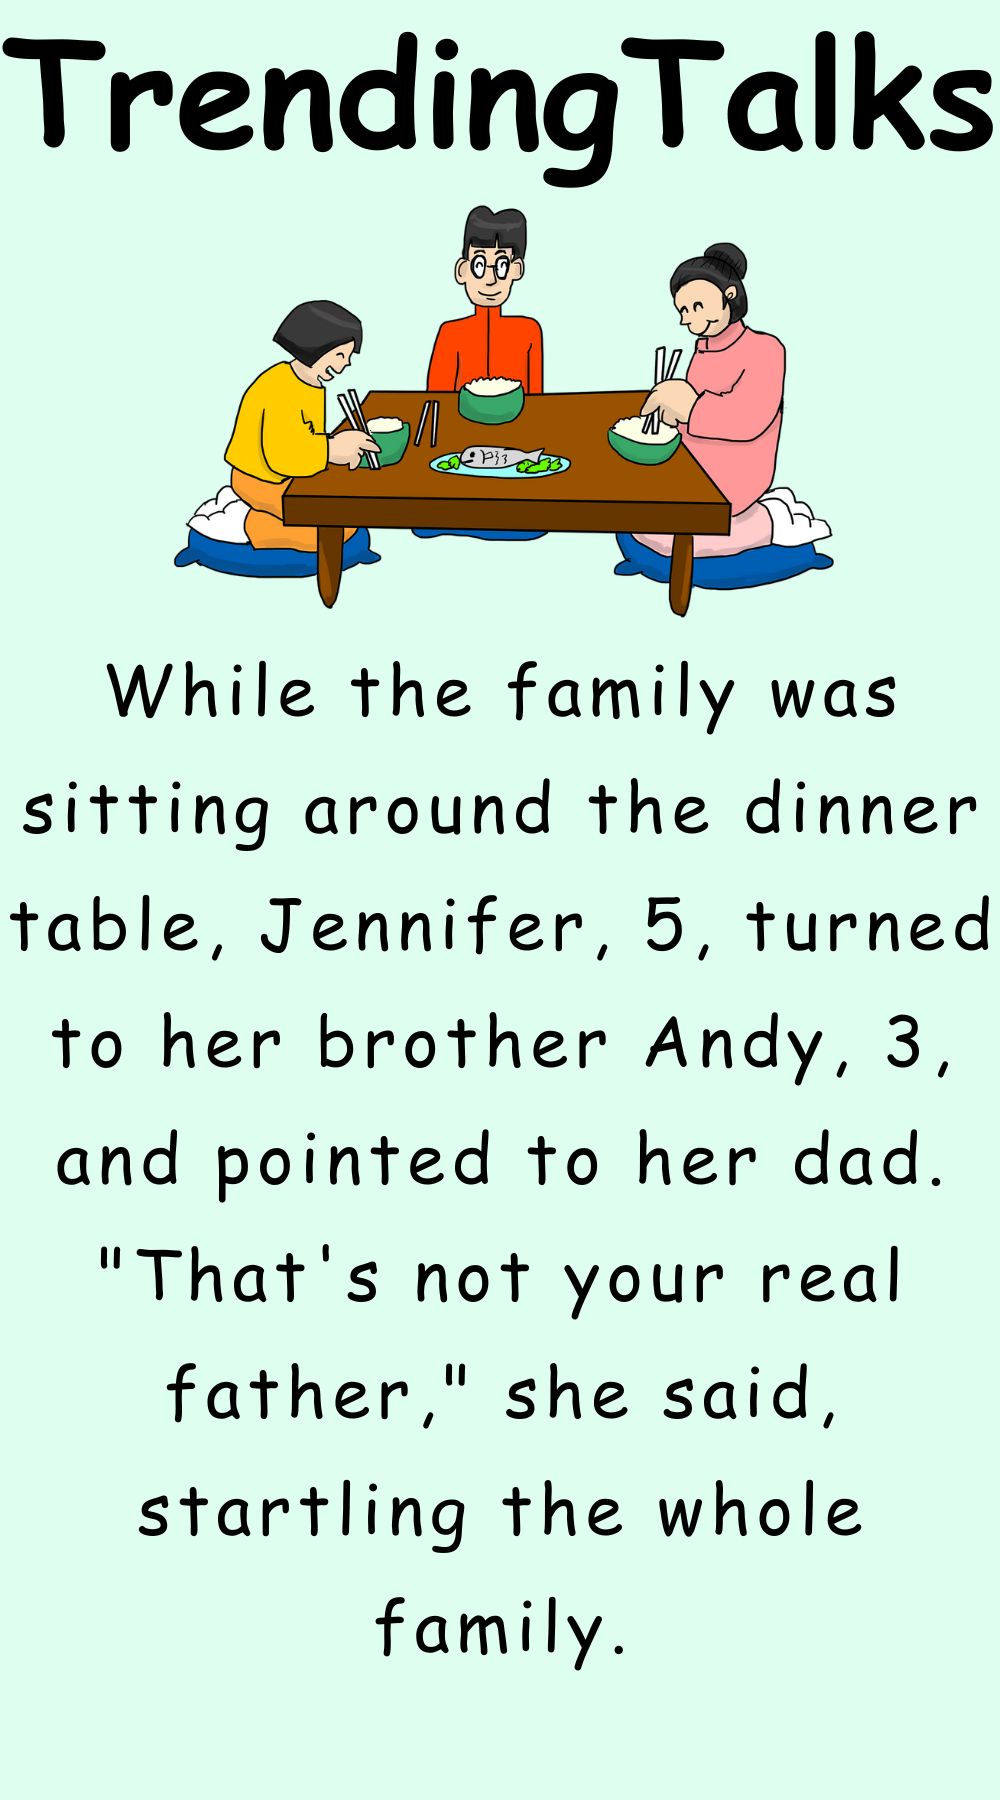 A family was sitting around the dinner table